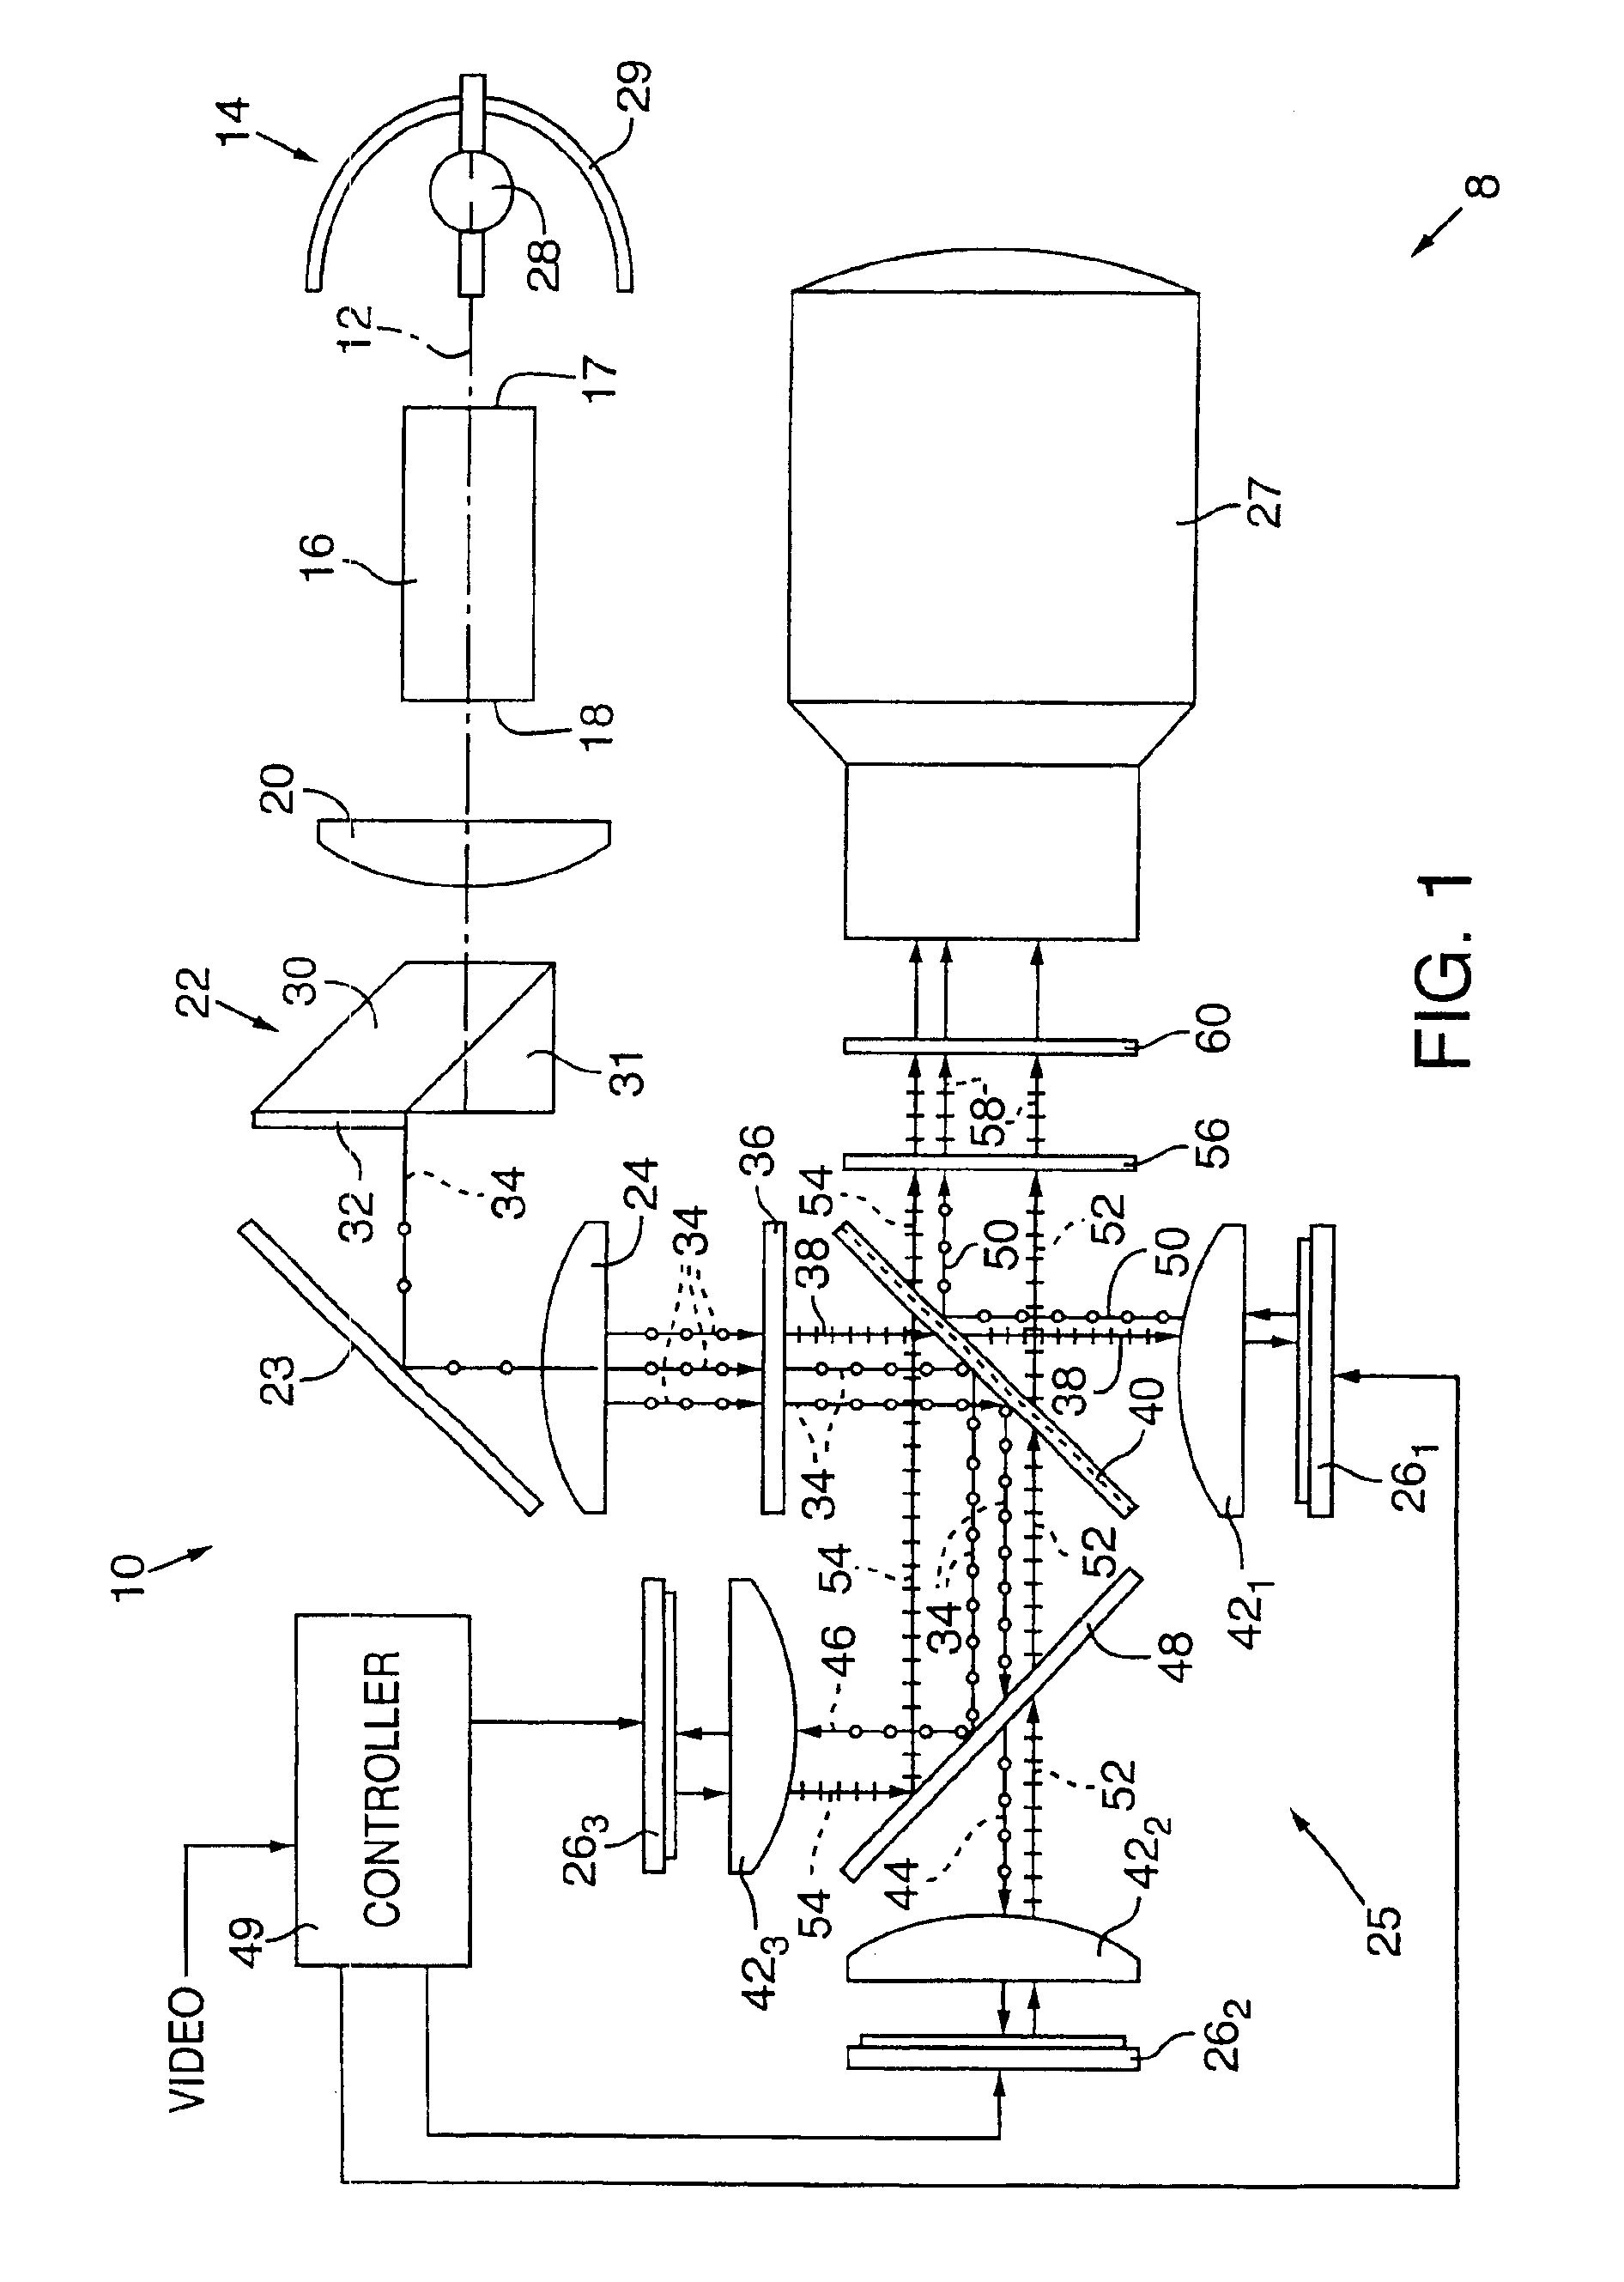 Color video projection system employing reflective liquid crystal display devices